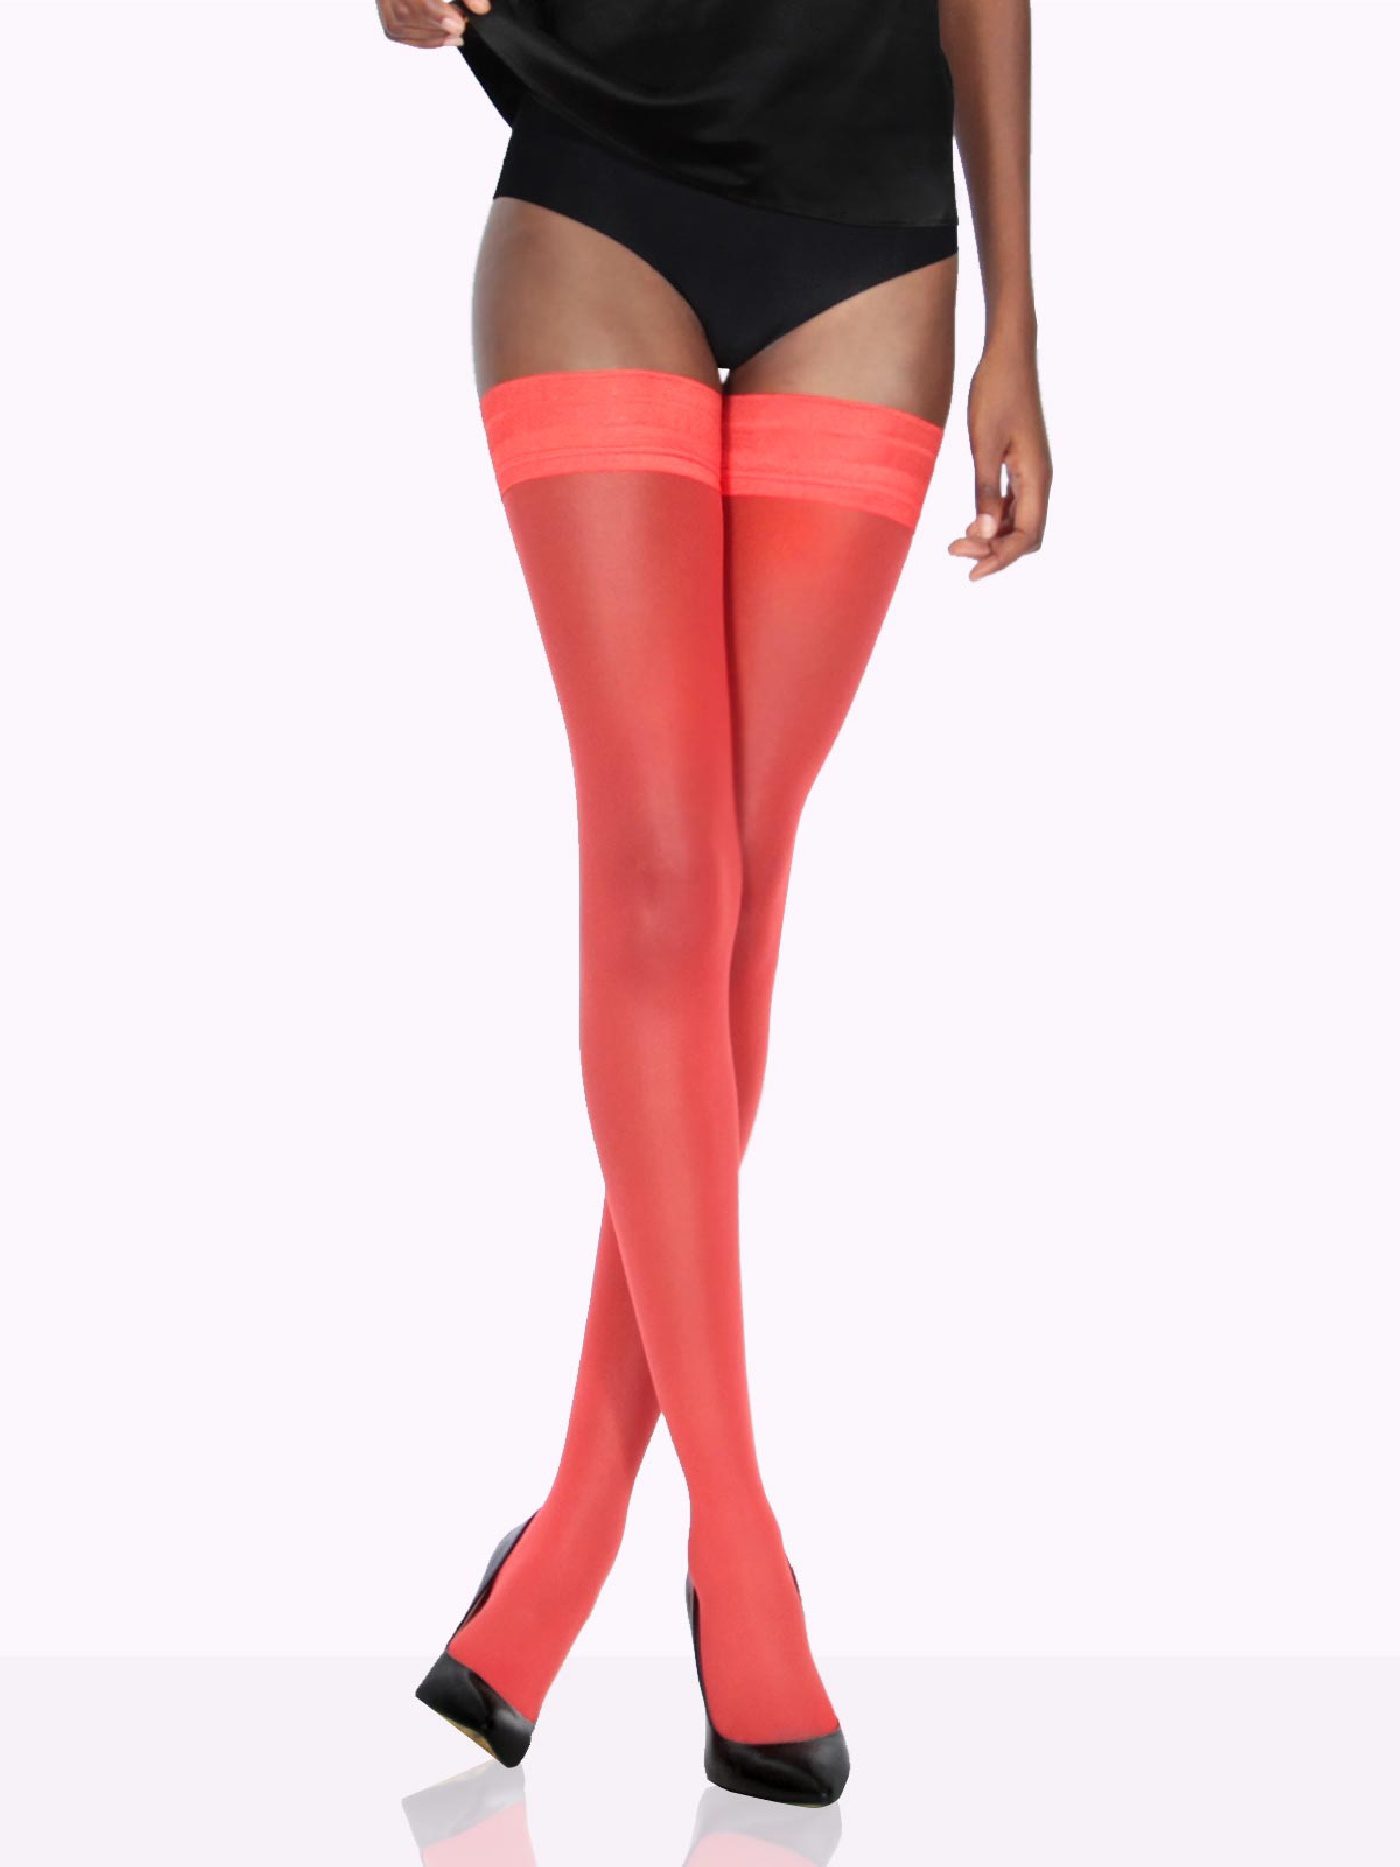 VienneMilano: Luxury Italian Hold-Ups at an Affordable Price